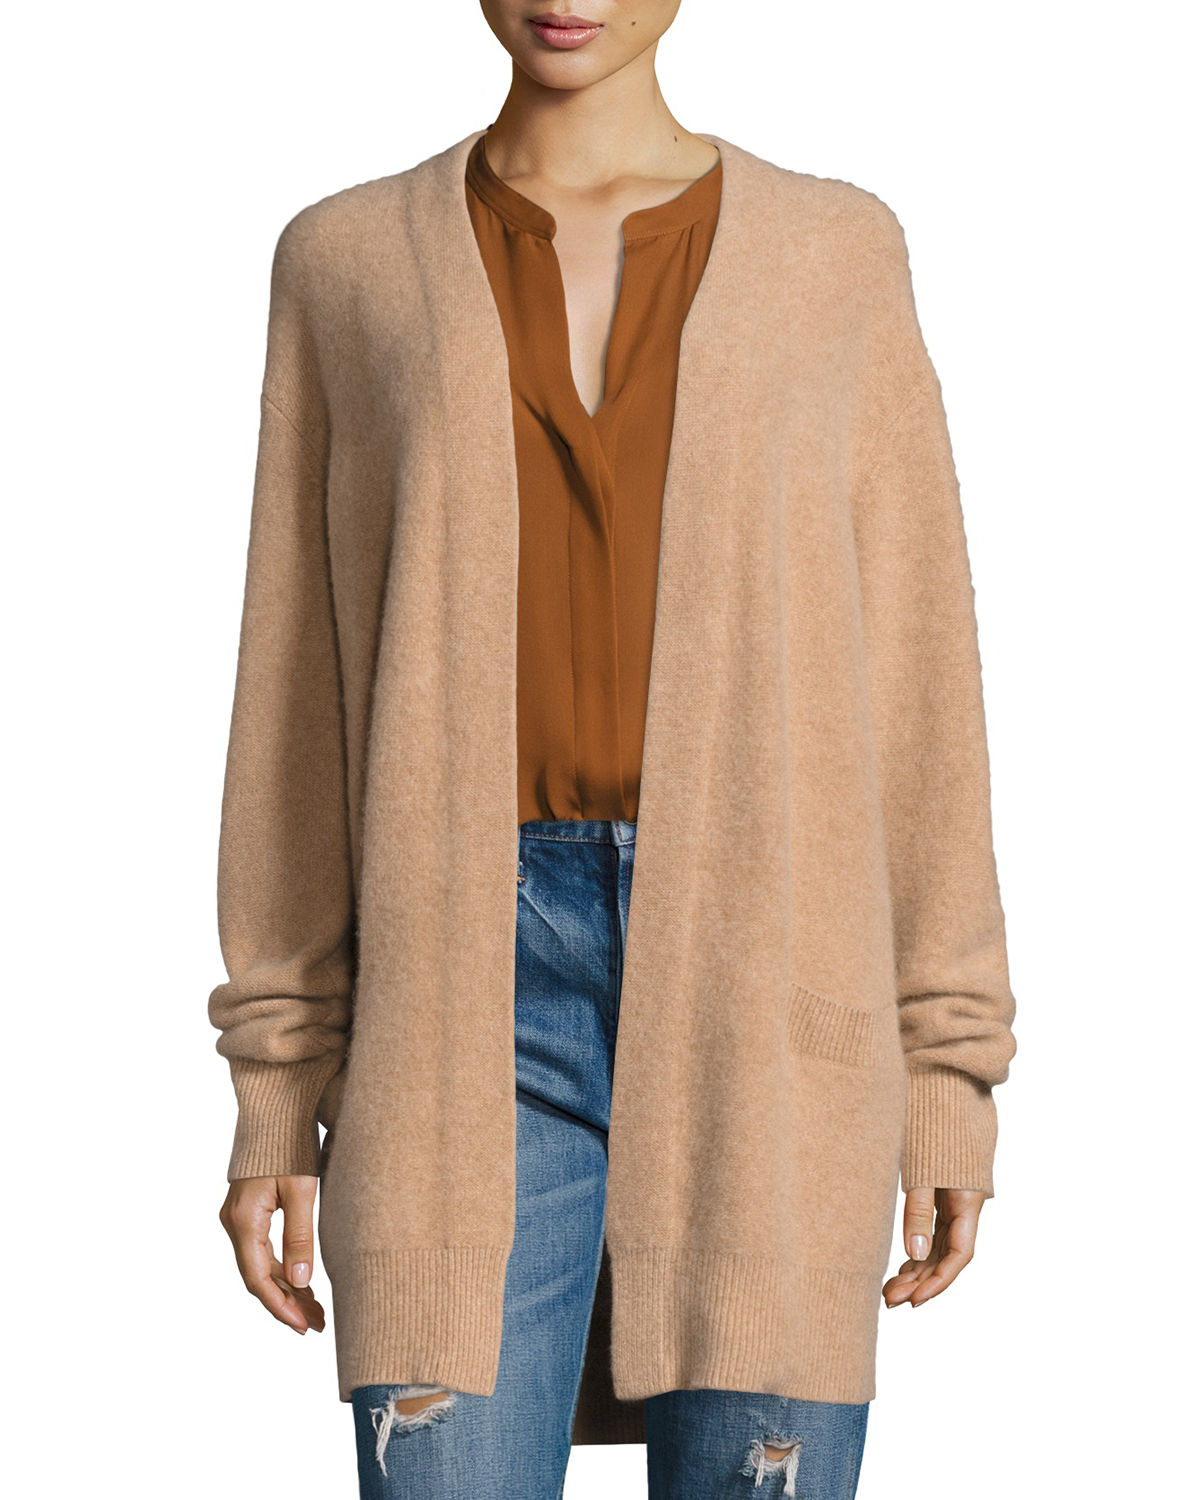  Vince  Boiled Cashmere Open front Long line Cardigan  Lyst